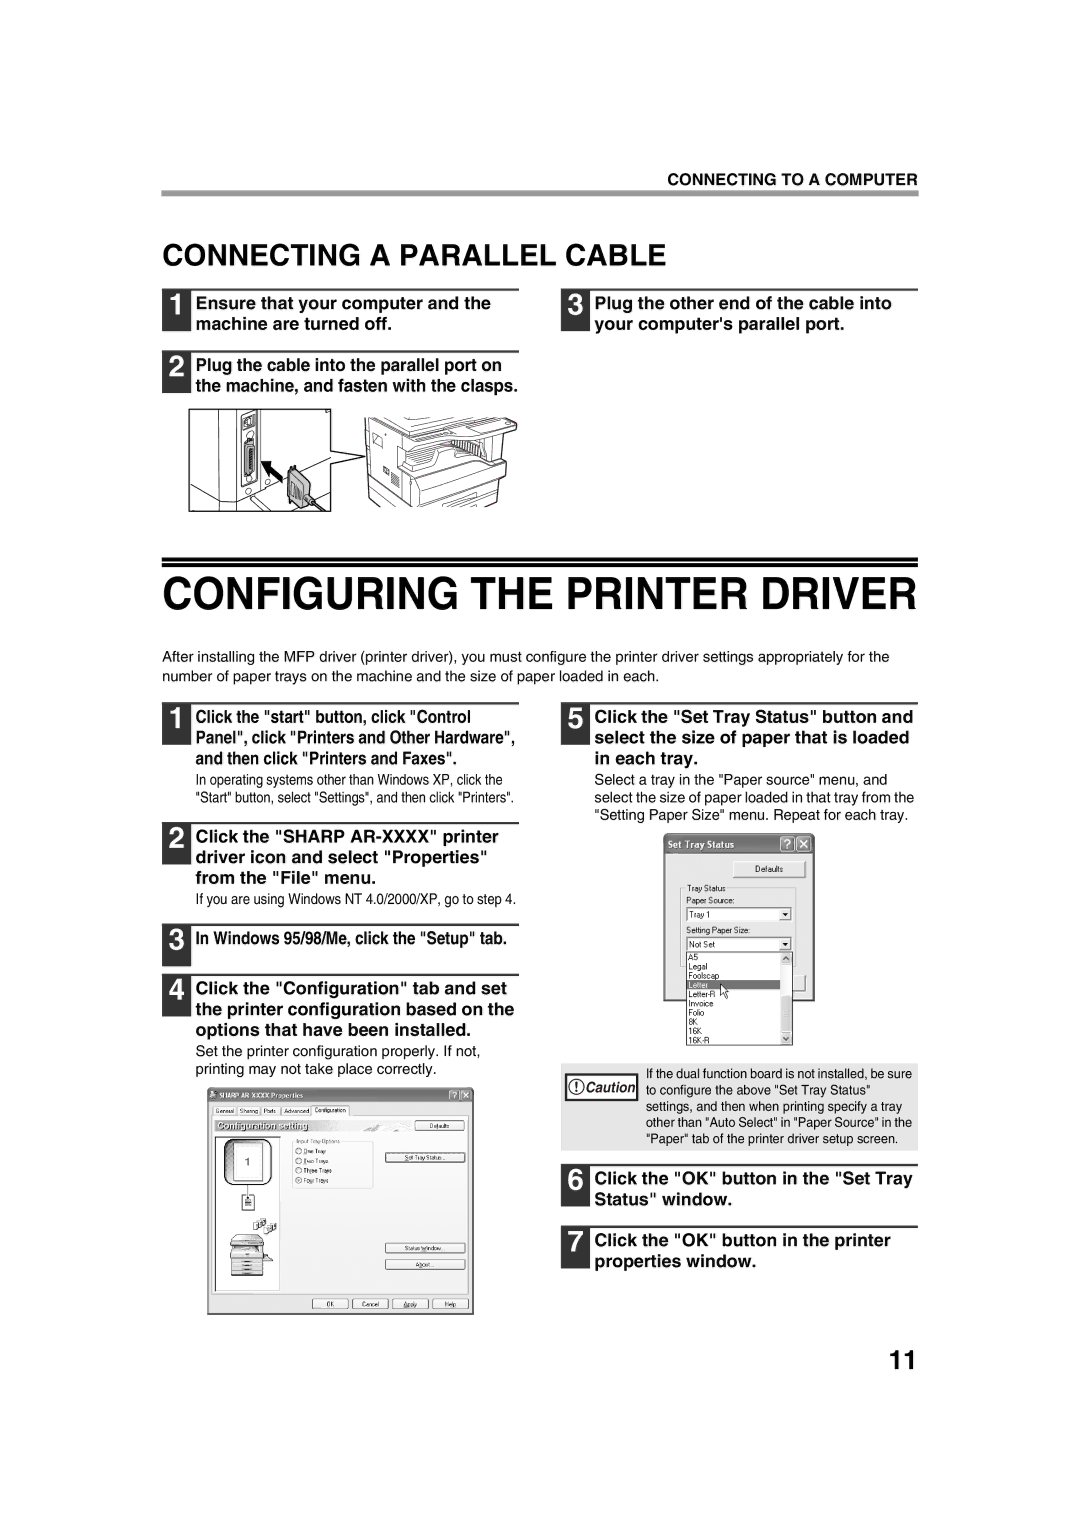 Sharp AR-M160, AR-M205 setup guide Configuring the Printer Driver, Connecting a Parallel Cable 